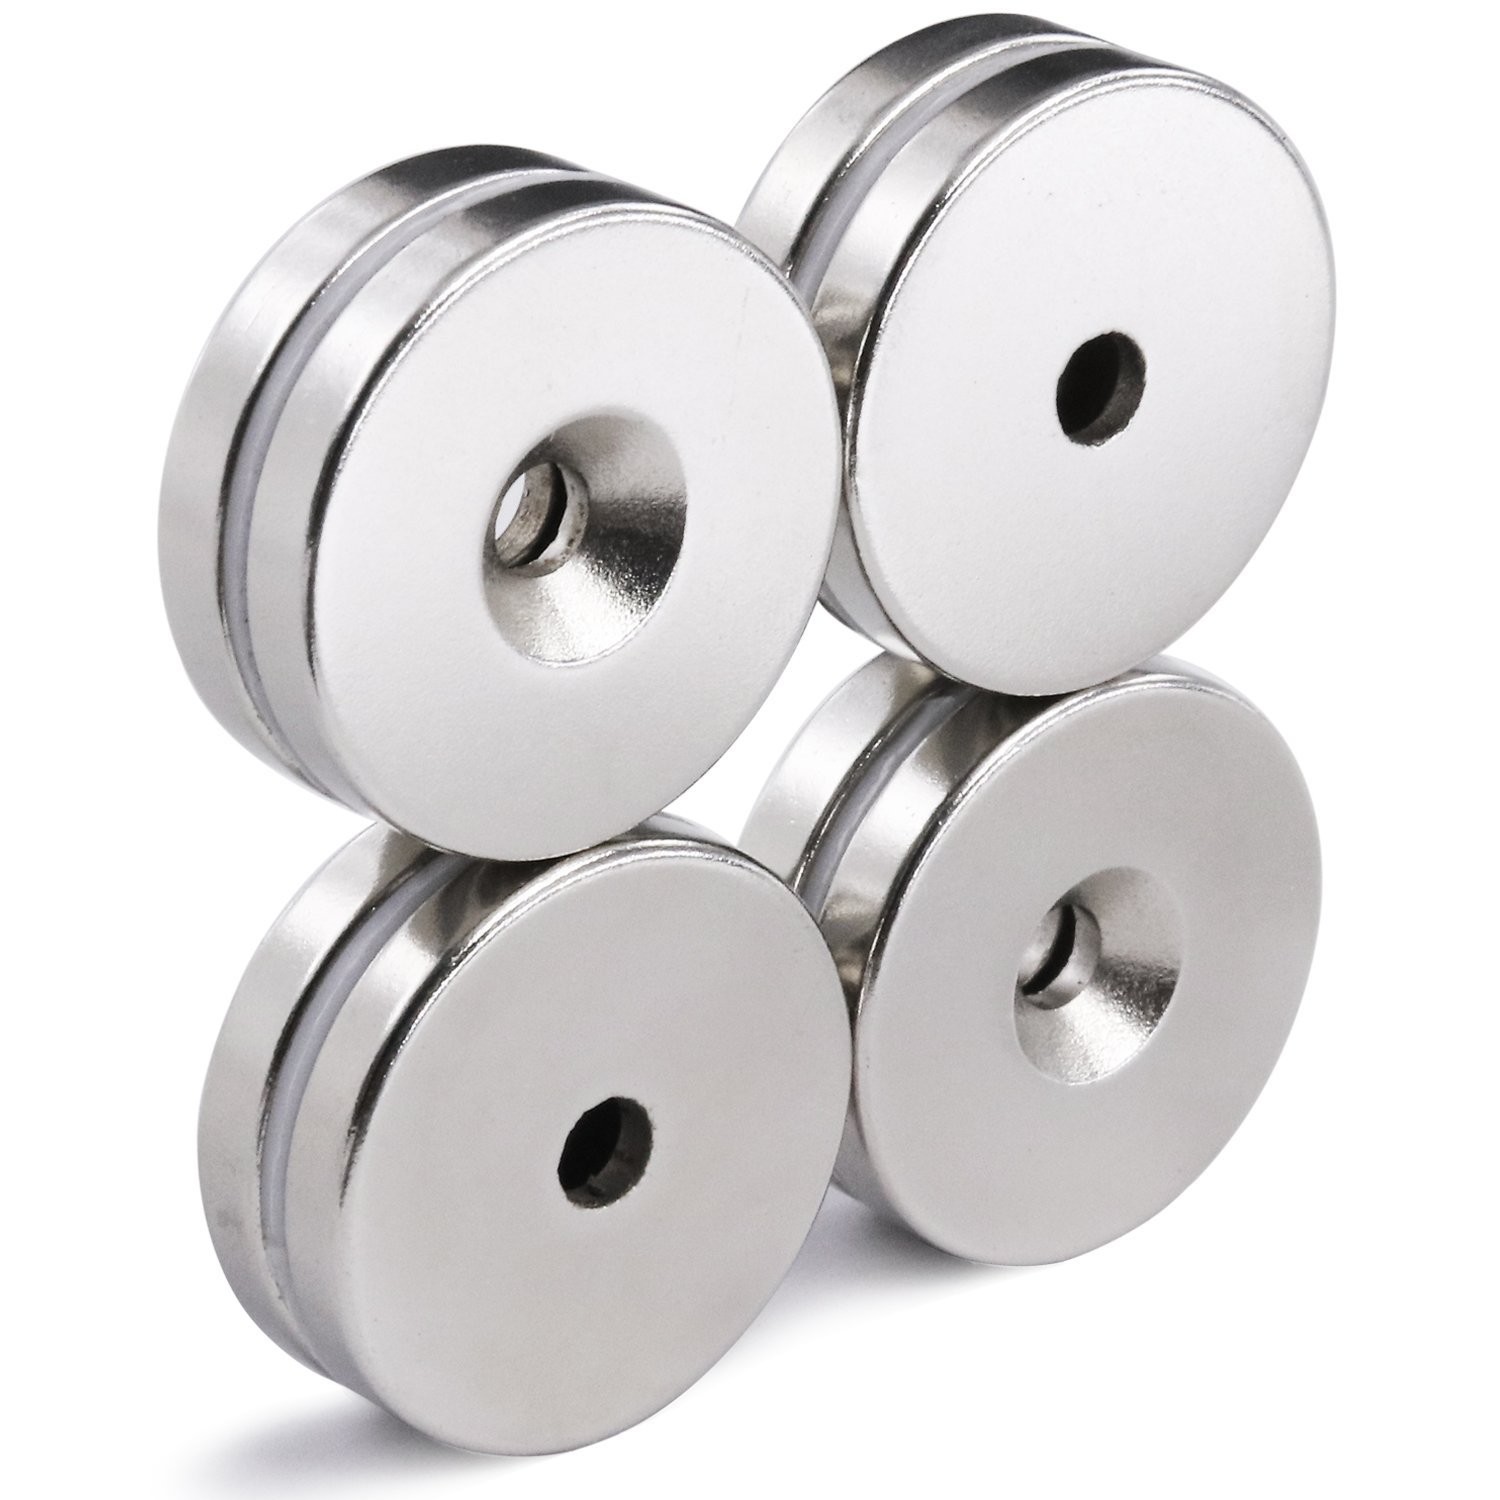 Buy cheap Kellin Neodymium Magnet Disc with Countersunk Pair Magnetized Refrigerator Magnets from wholesalers